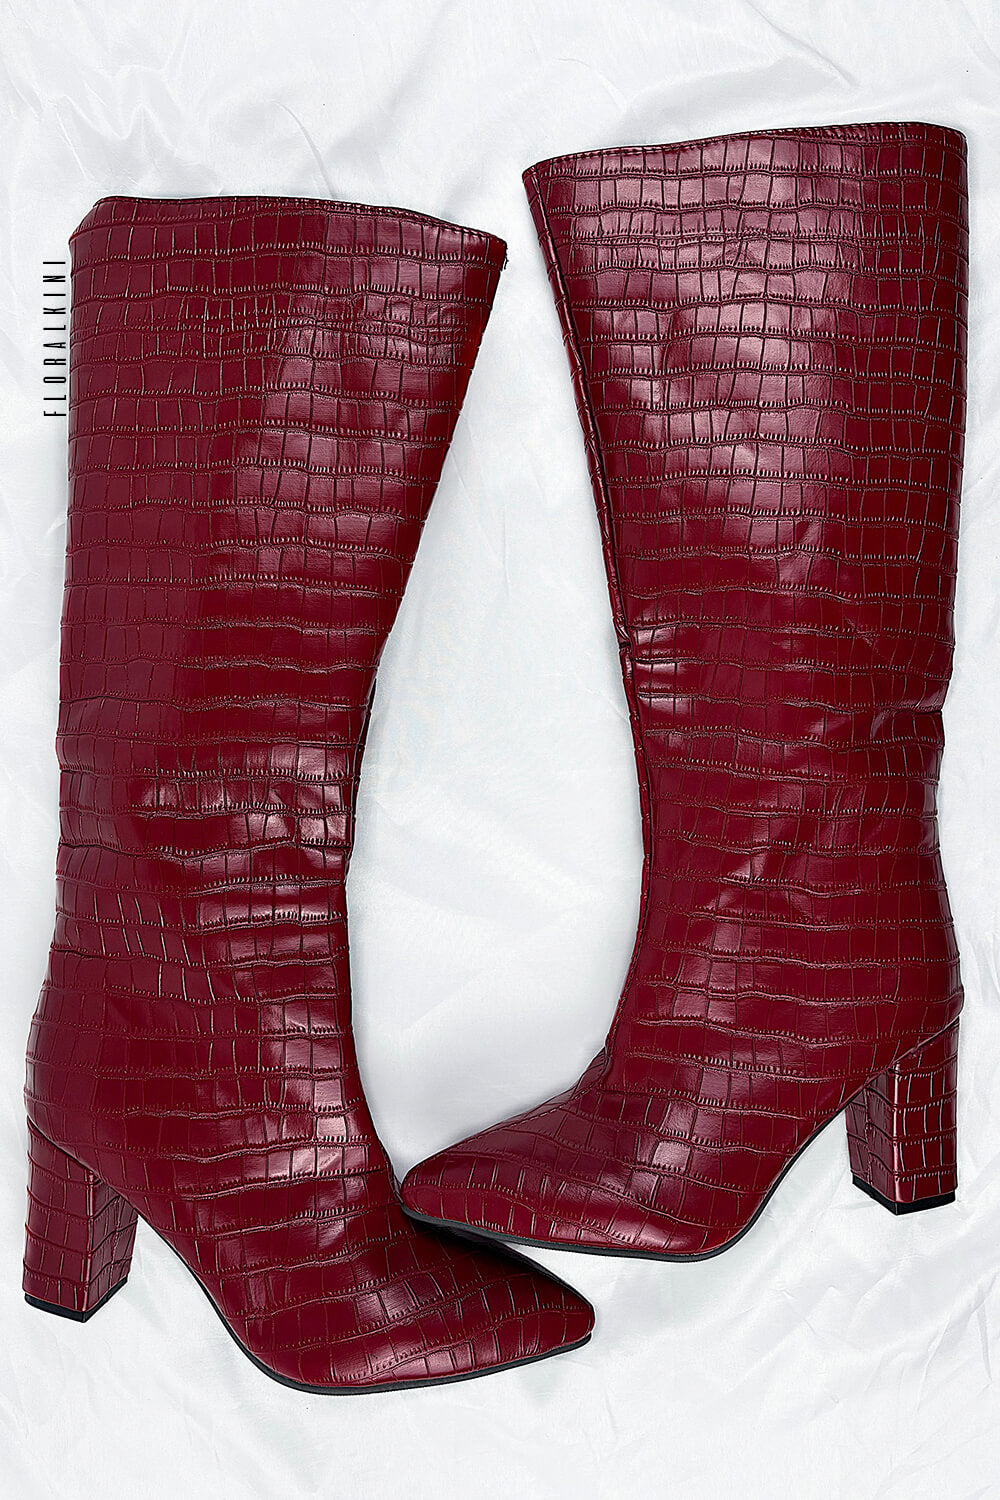 Croc-effect leather knee-high boots